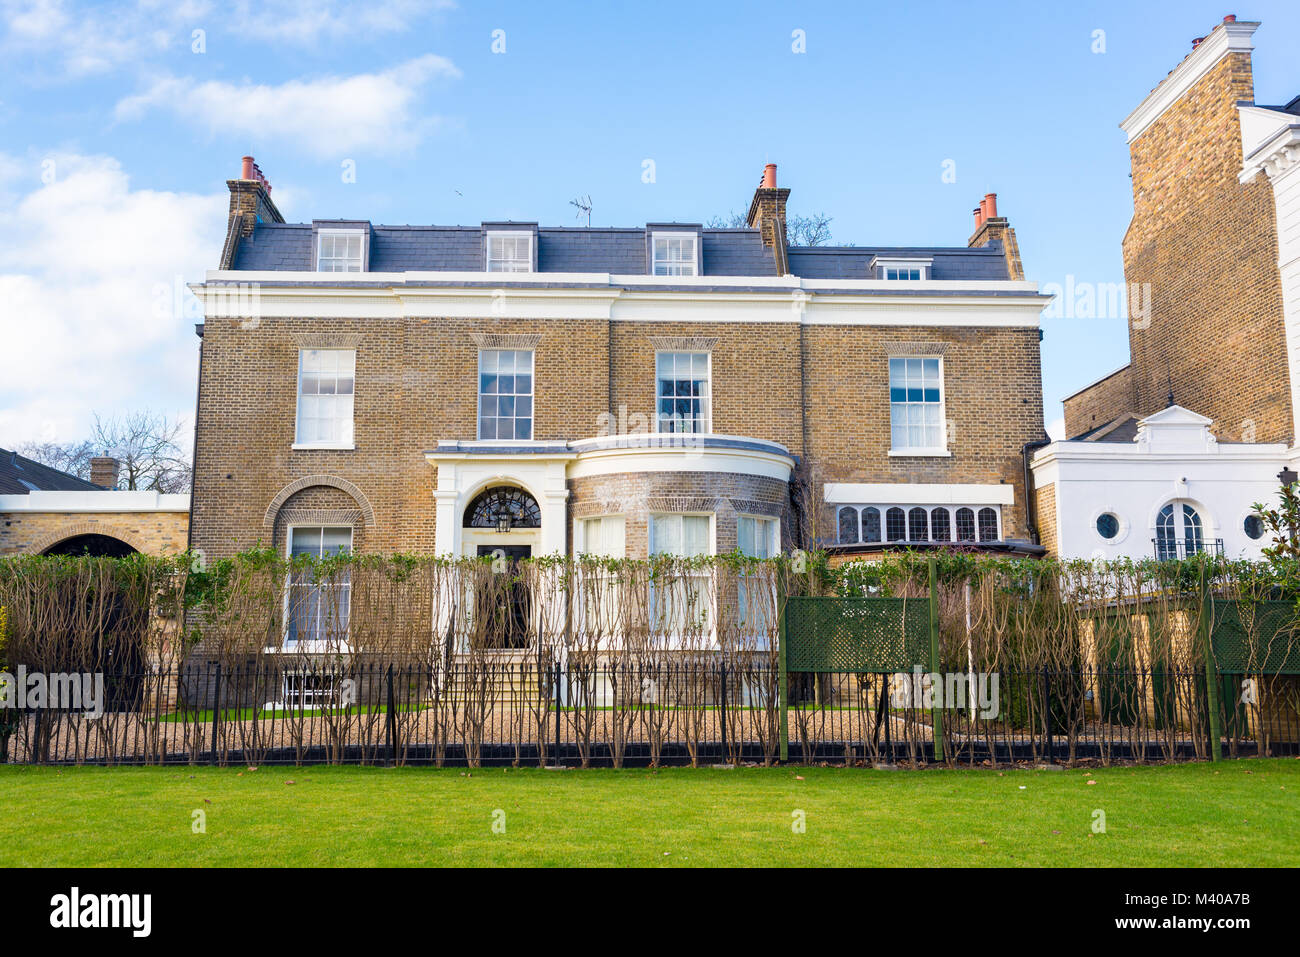 Clapham London, UK - January 2018: Facade of an opulent restored Victorian house luxury mansion in yellow bricks and white finishing with private gard Stock Photo